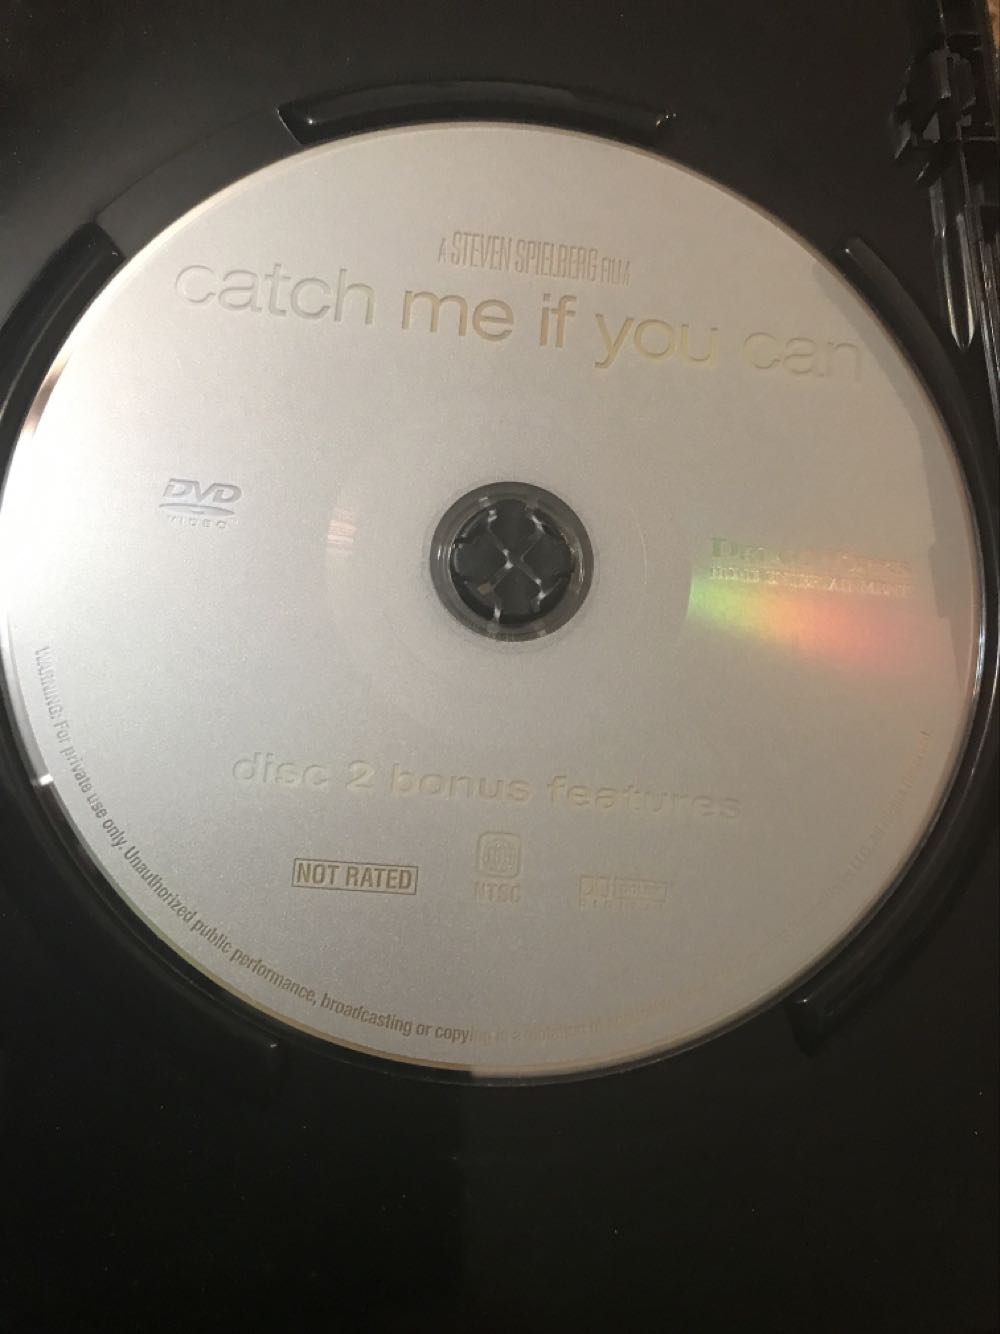 Catch Me If You Can DVD movie collectible [Barcode 678149033229] - Main Image 4